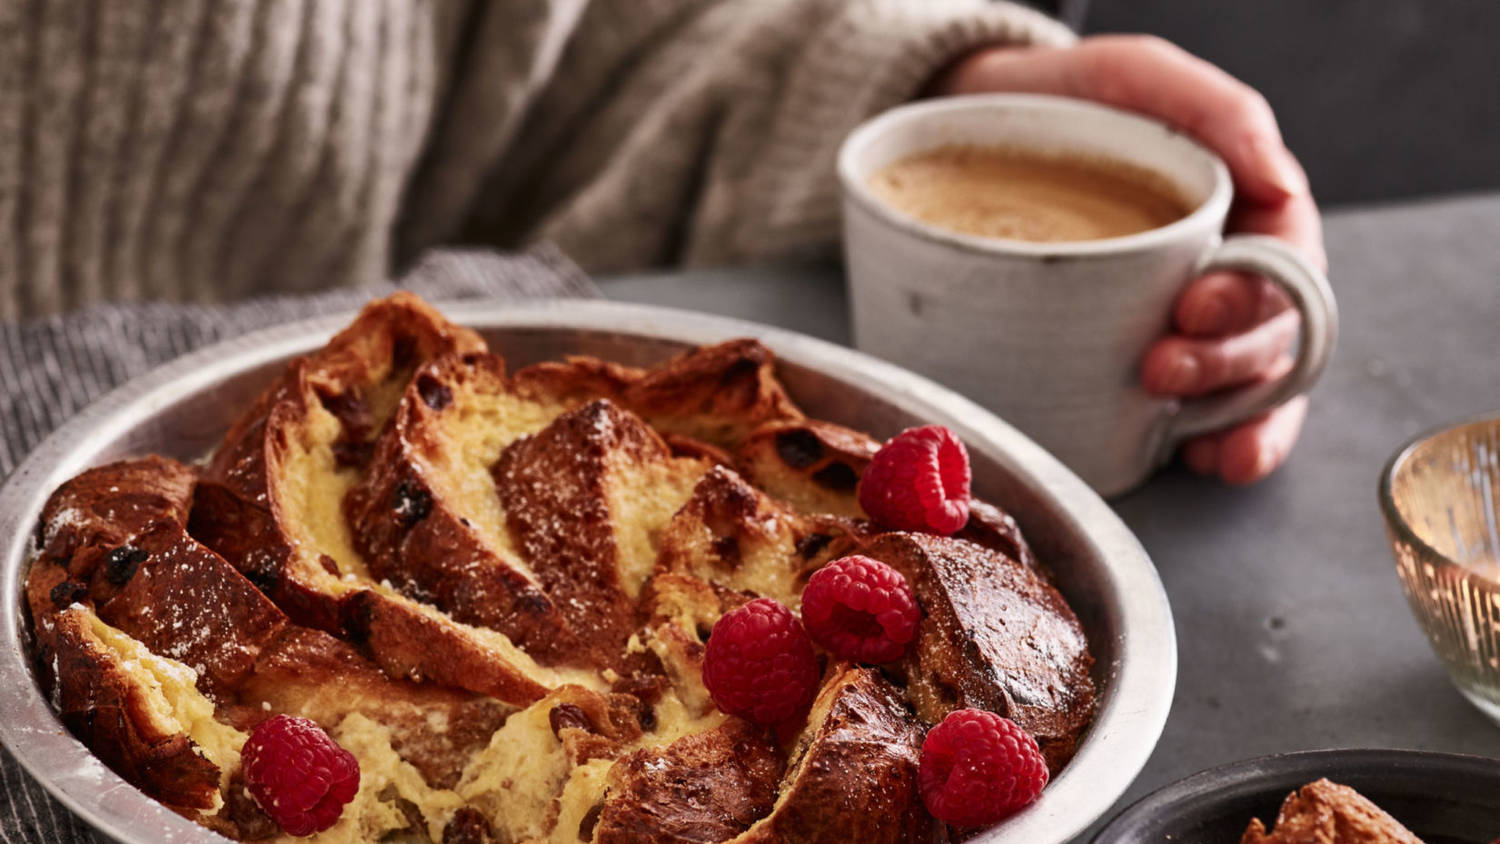 Panettone bread and butter pudding